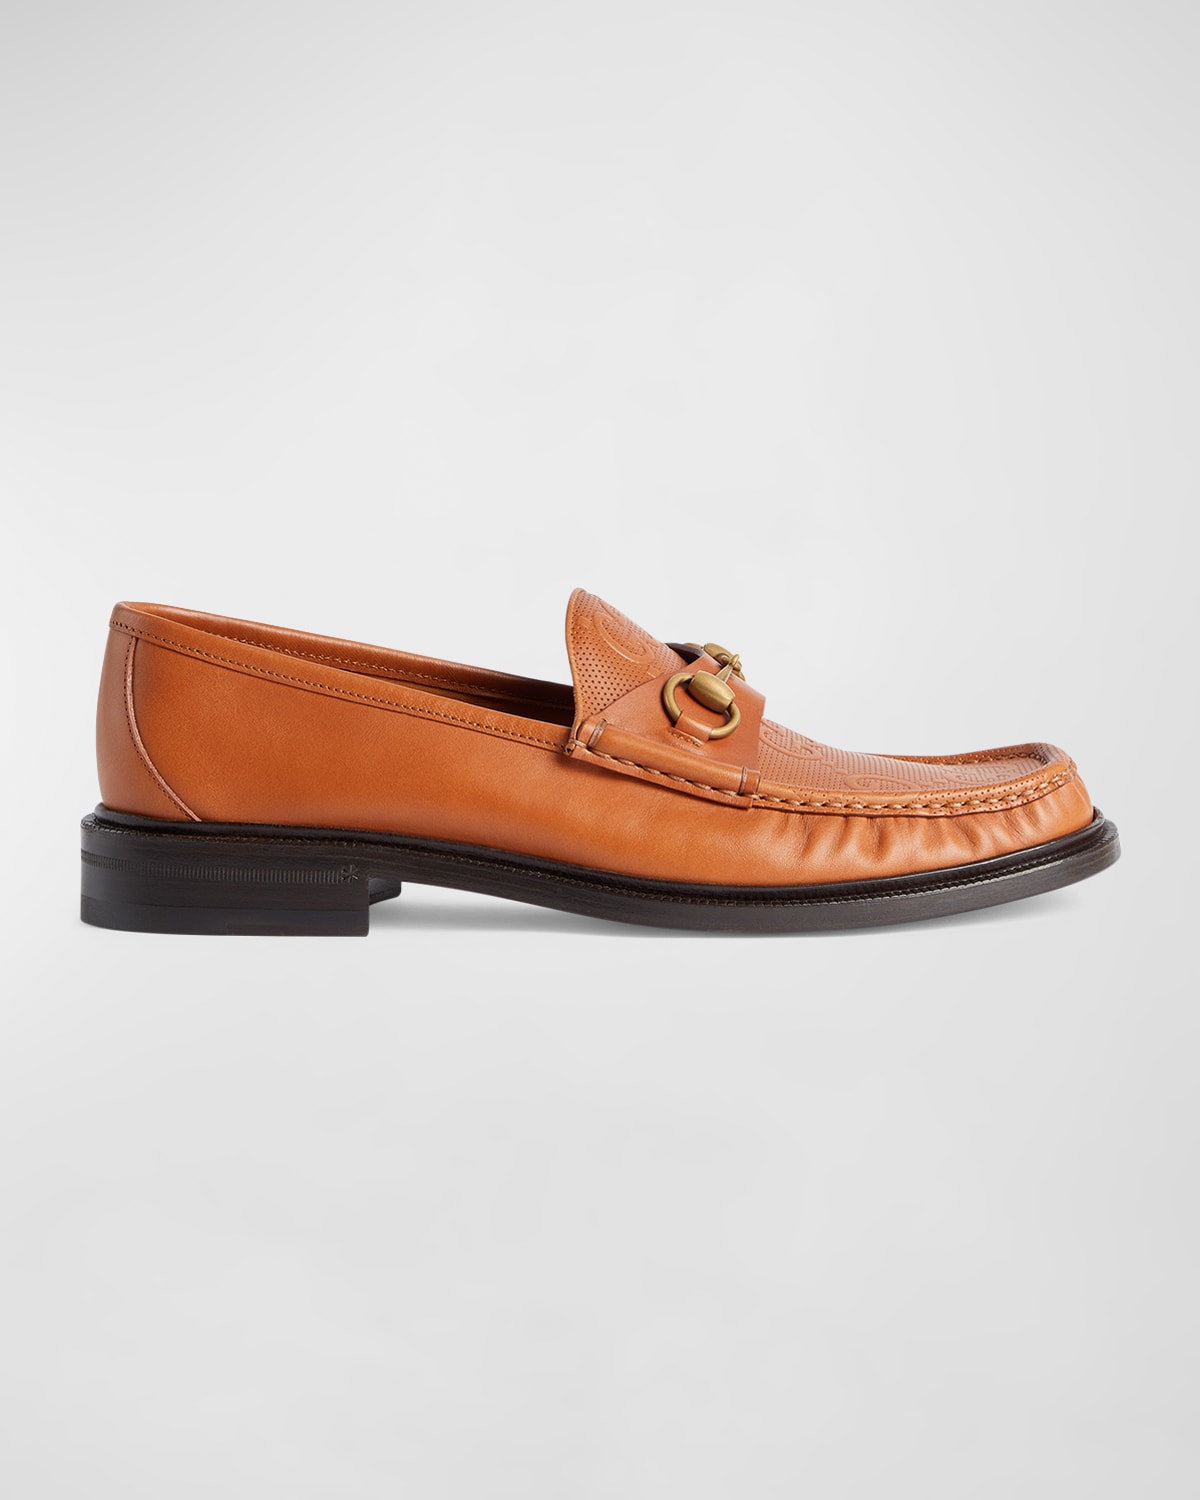 GUCCI MEN'S LEATHER HORSEBIT LOAFERS